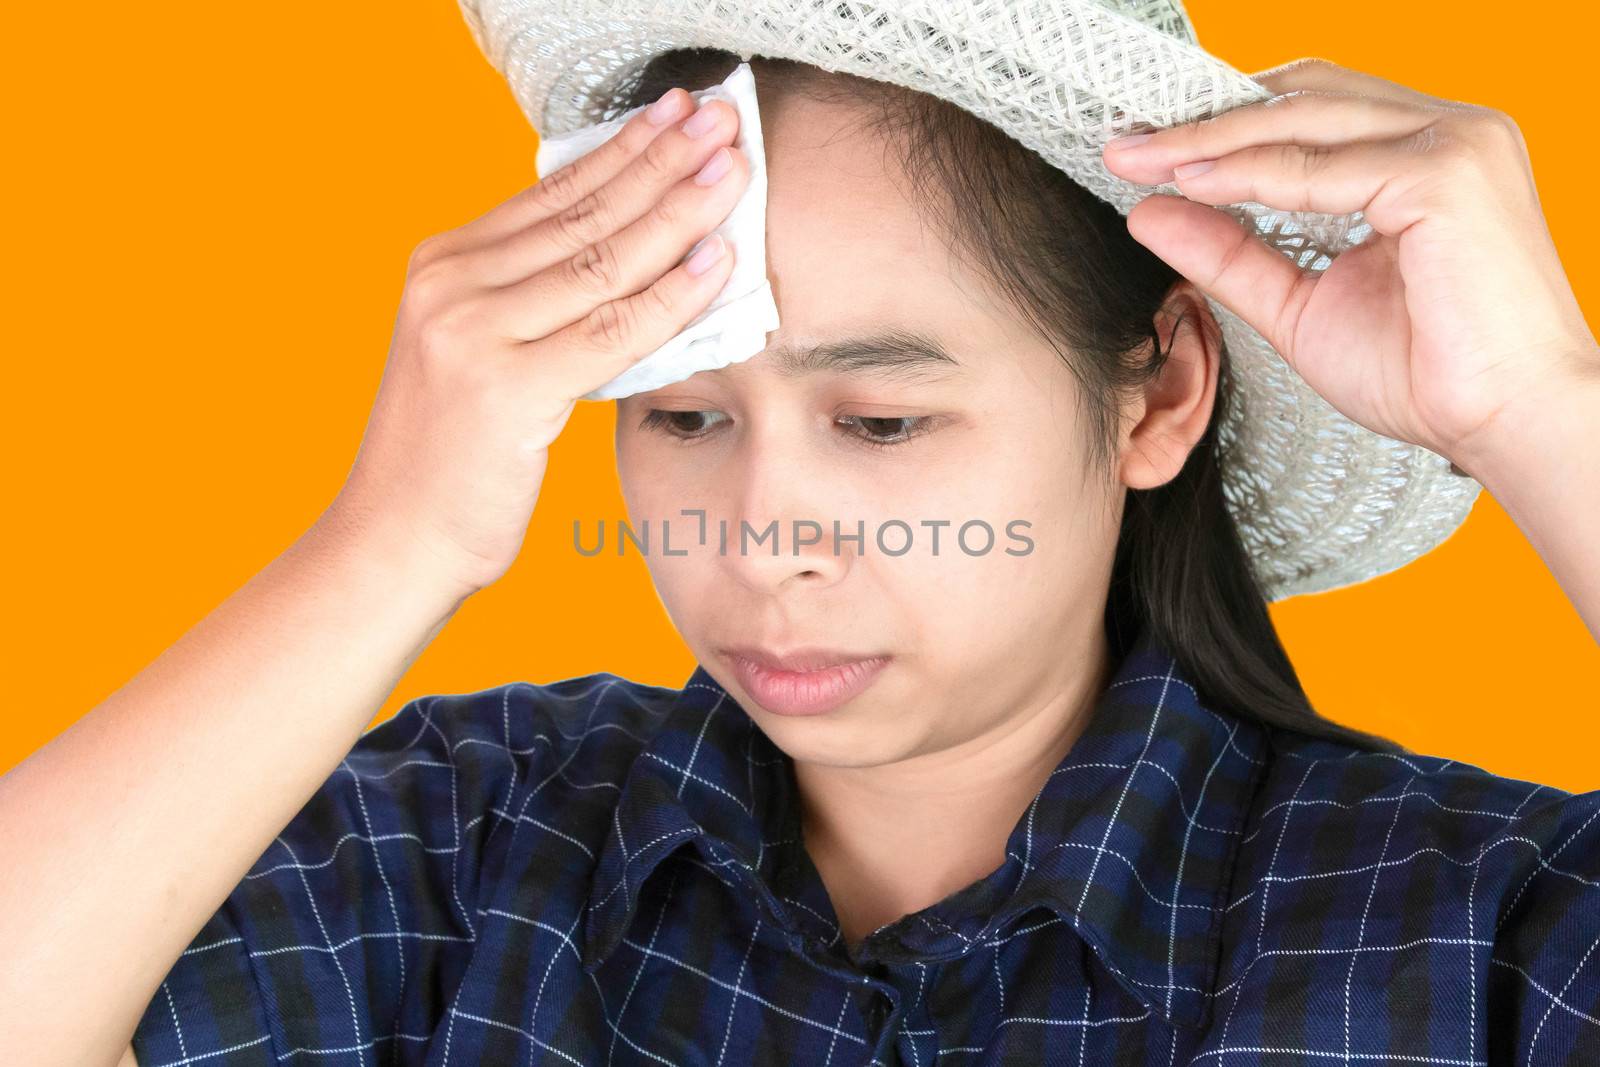 Asian young woman uses a tissue to wiped the sweat on her forehead on a hot day.